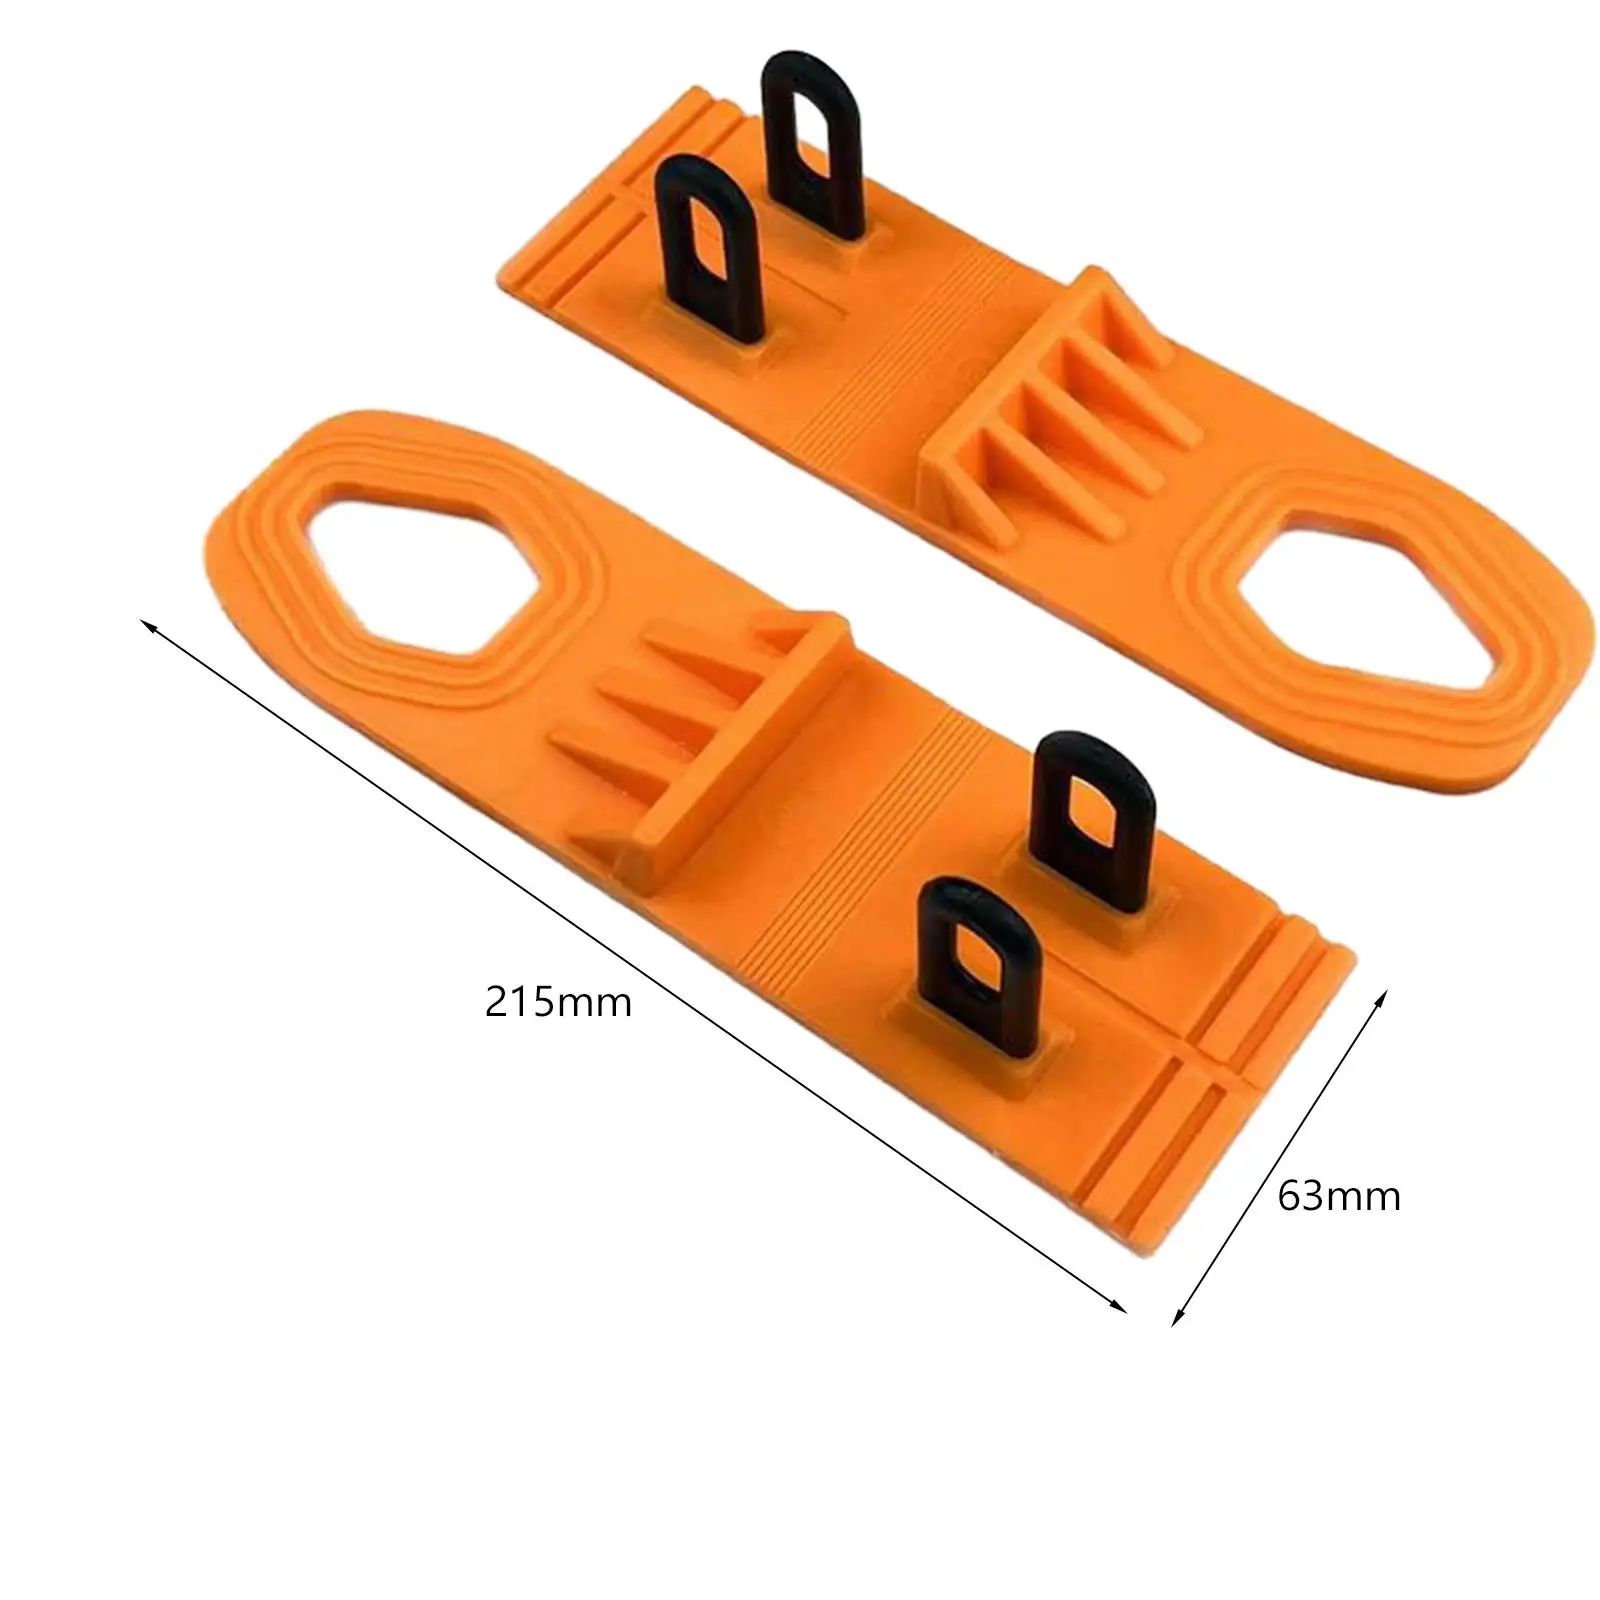 2 Pieces Dent Puller Tabs Durable DIY Hand Tool Automobile Dent Repair Tool Powerful Auto Body Dent Remover Glue Pulling Tabs